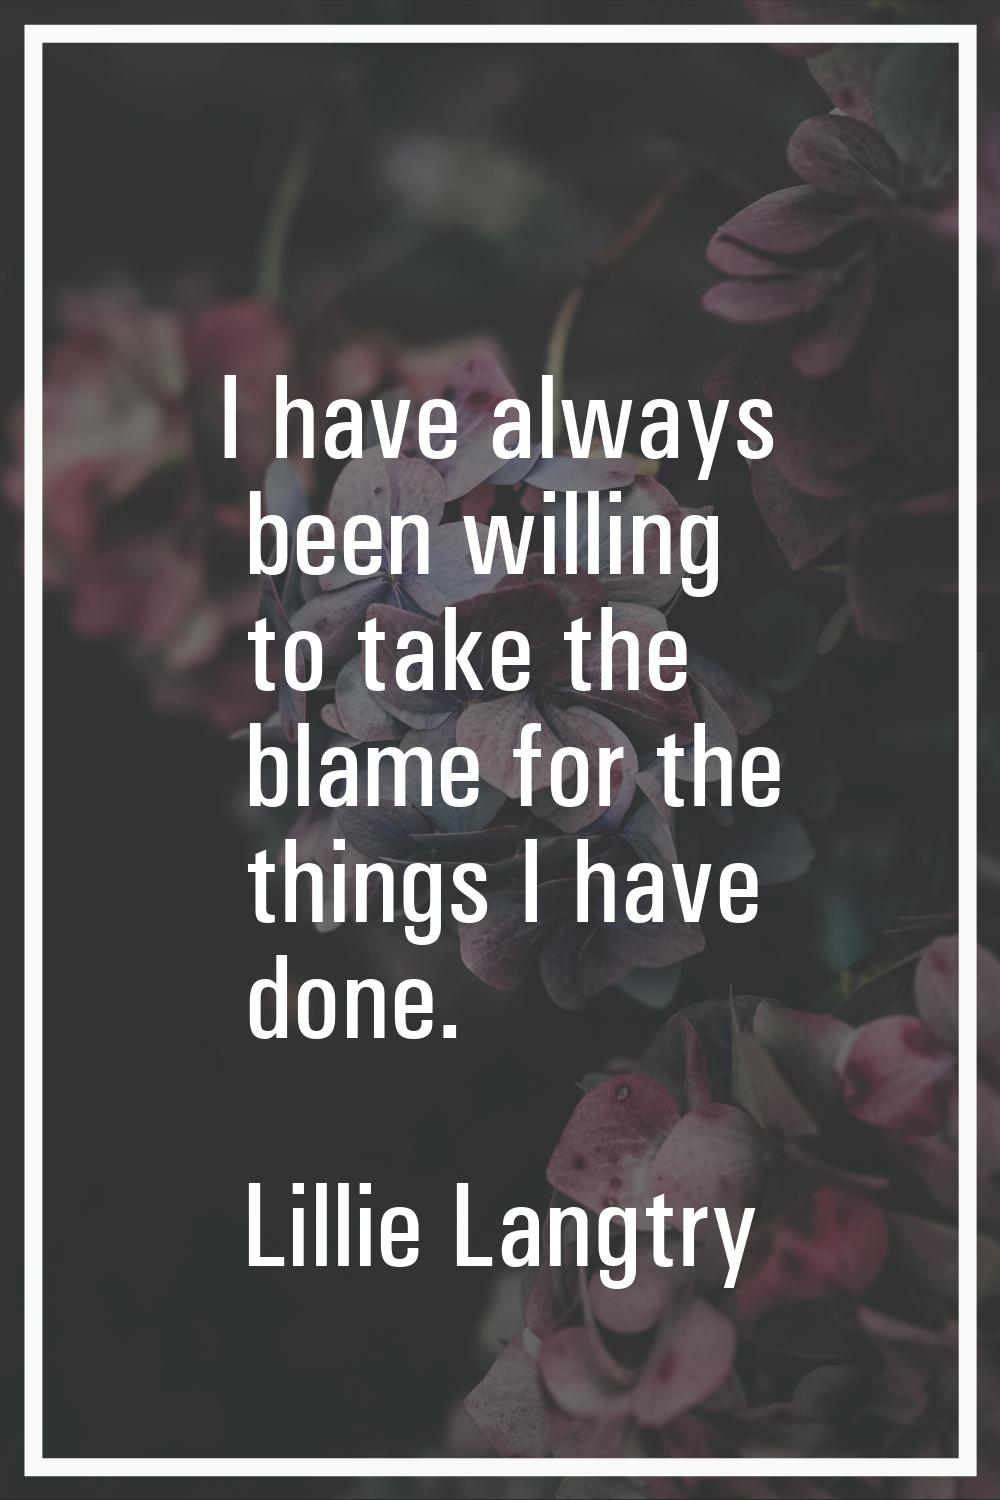 I have always been willing to take the blame for the things I have done.